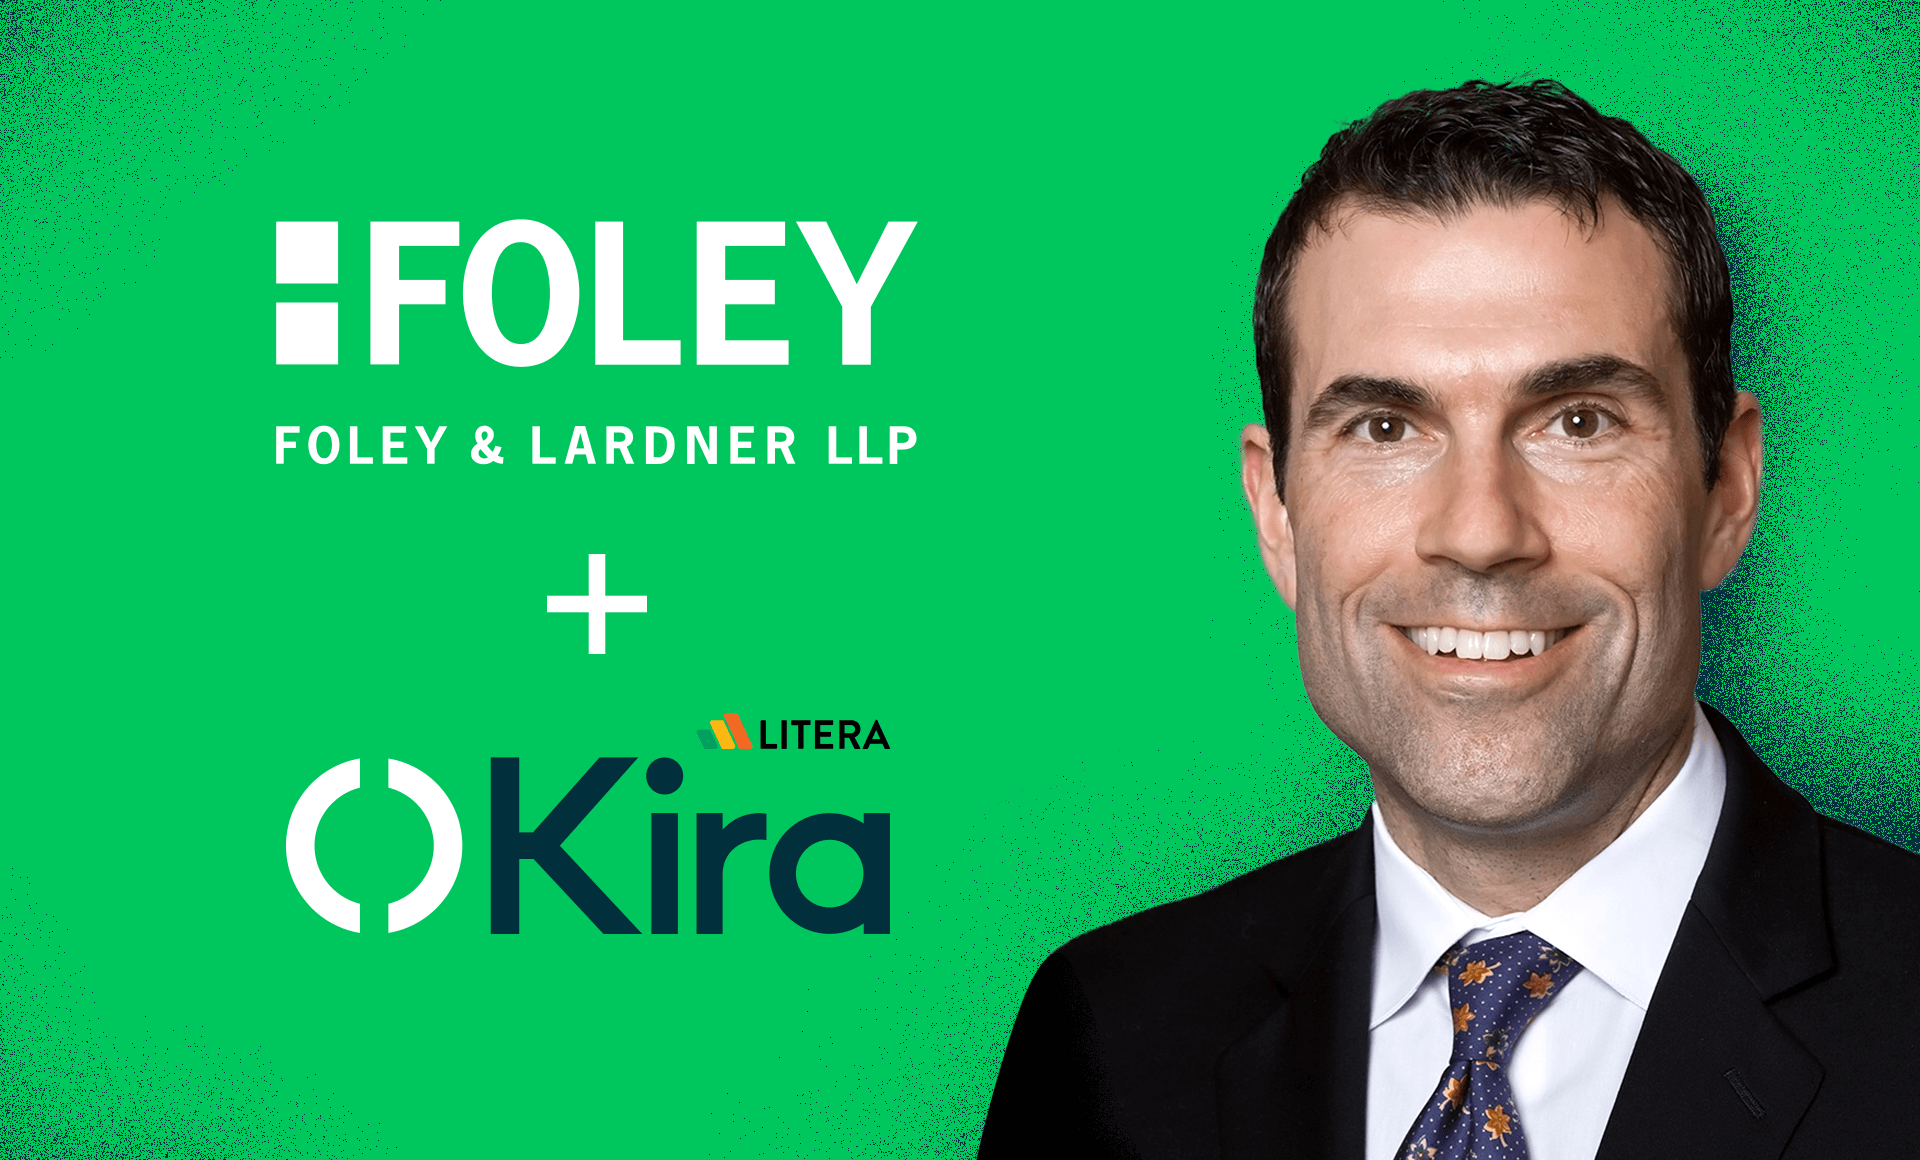 Read the blog article: Foley & Lardner Adopts Kira Across Its Mergers and Acquisitions Practice To Enhance Due Diligence Processes